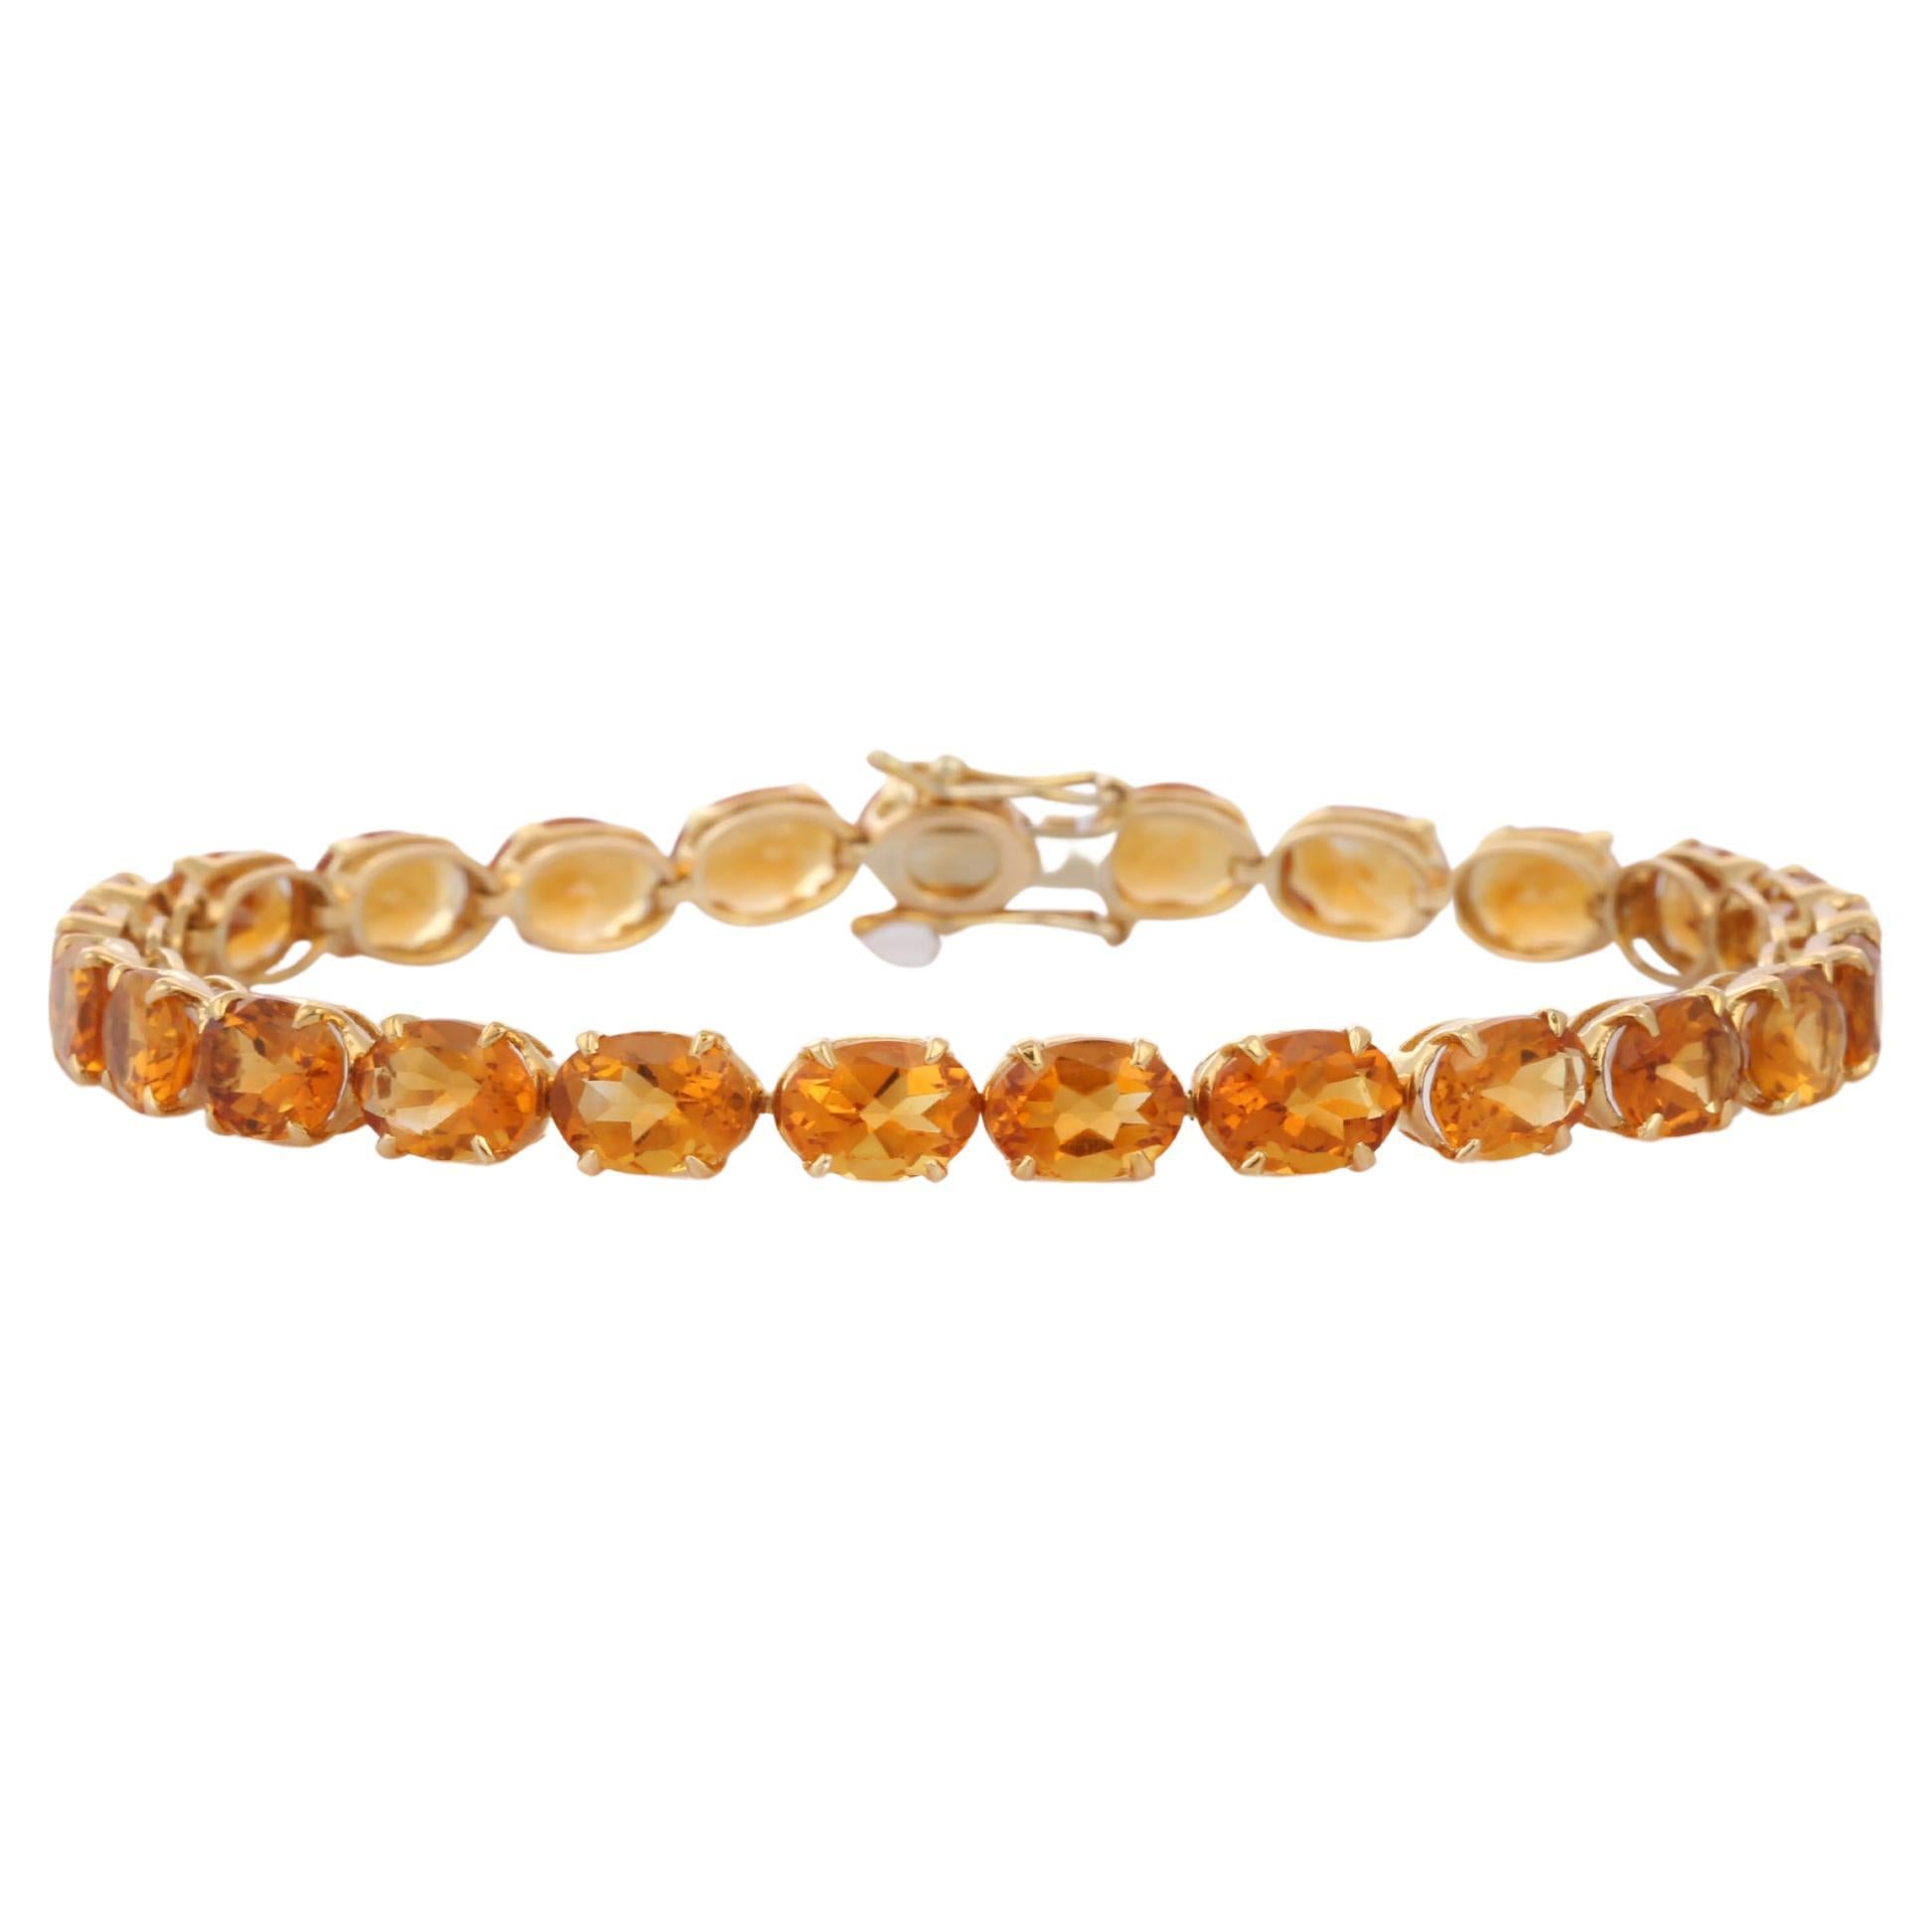 17.36 Ct Natural Citrine Handcrafted Tennis Bracelet in 18K Yellow Gold